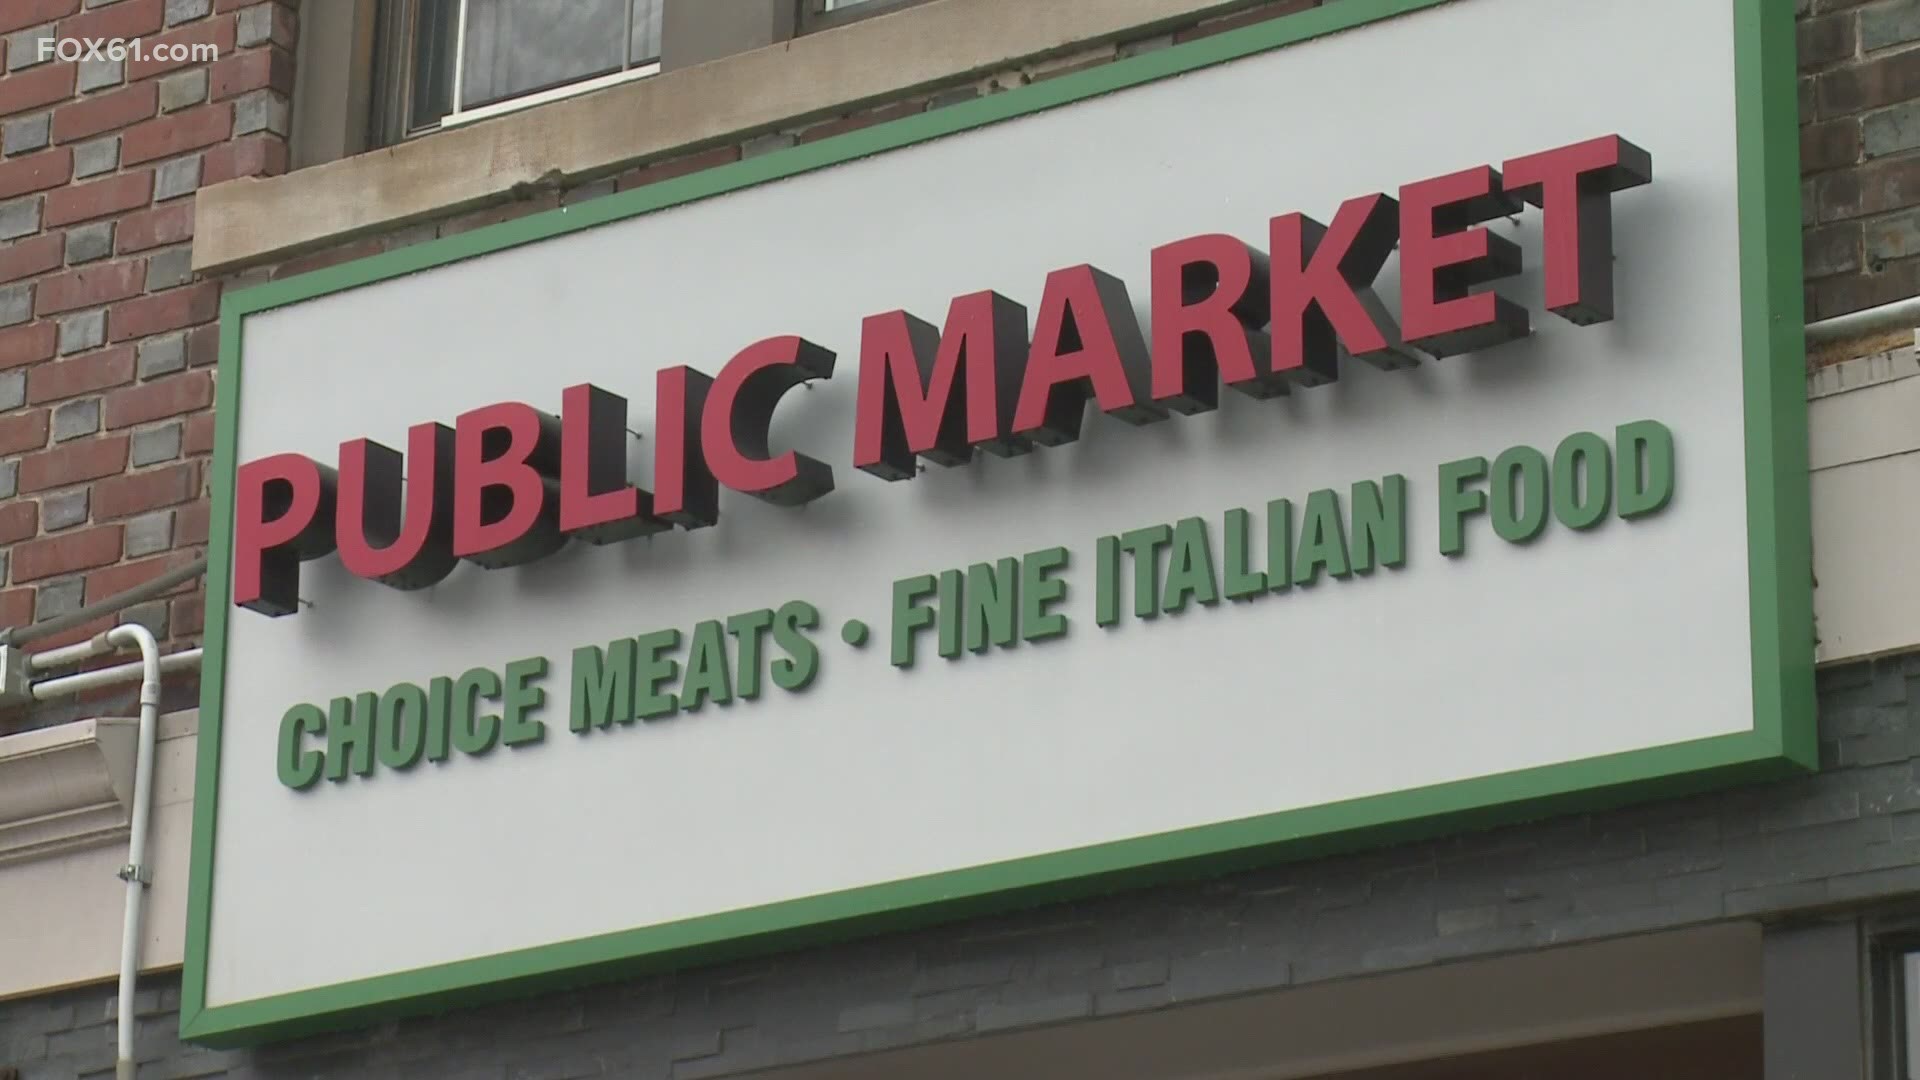 Public Market has been a landmark on Main Street for 106 years, but the pandemic wiped out their crucial catering business.